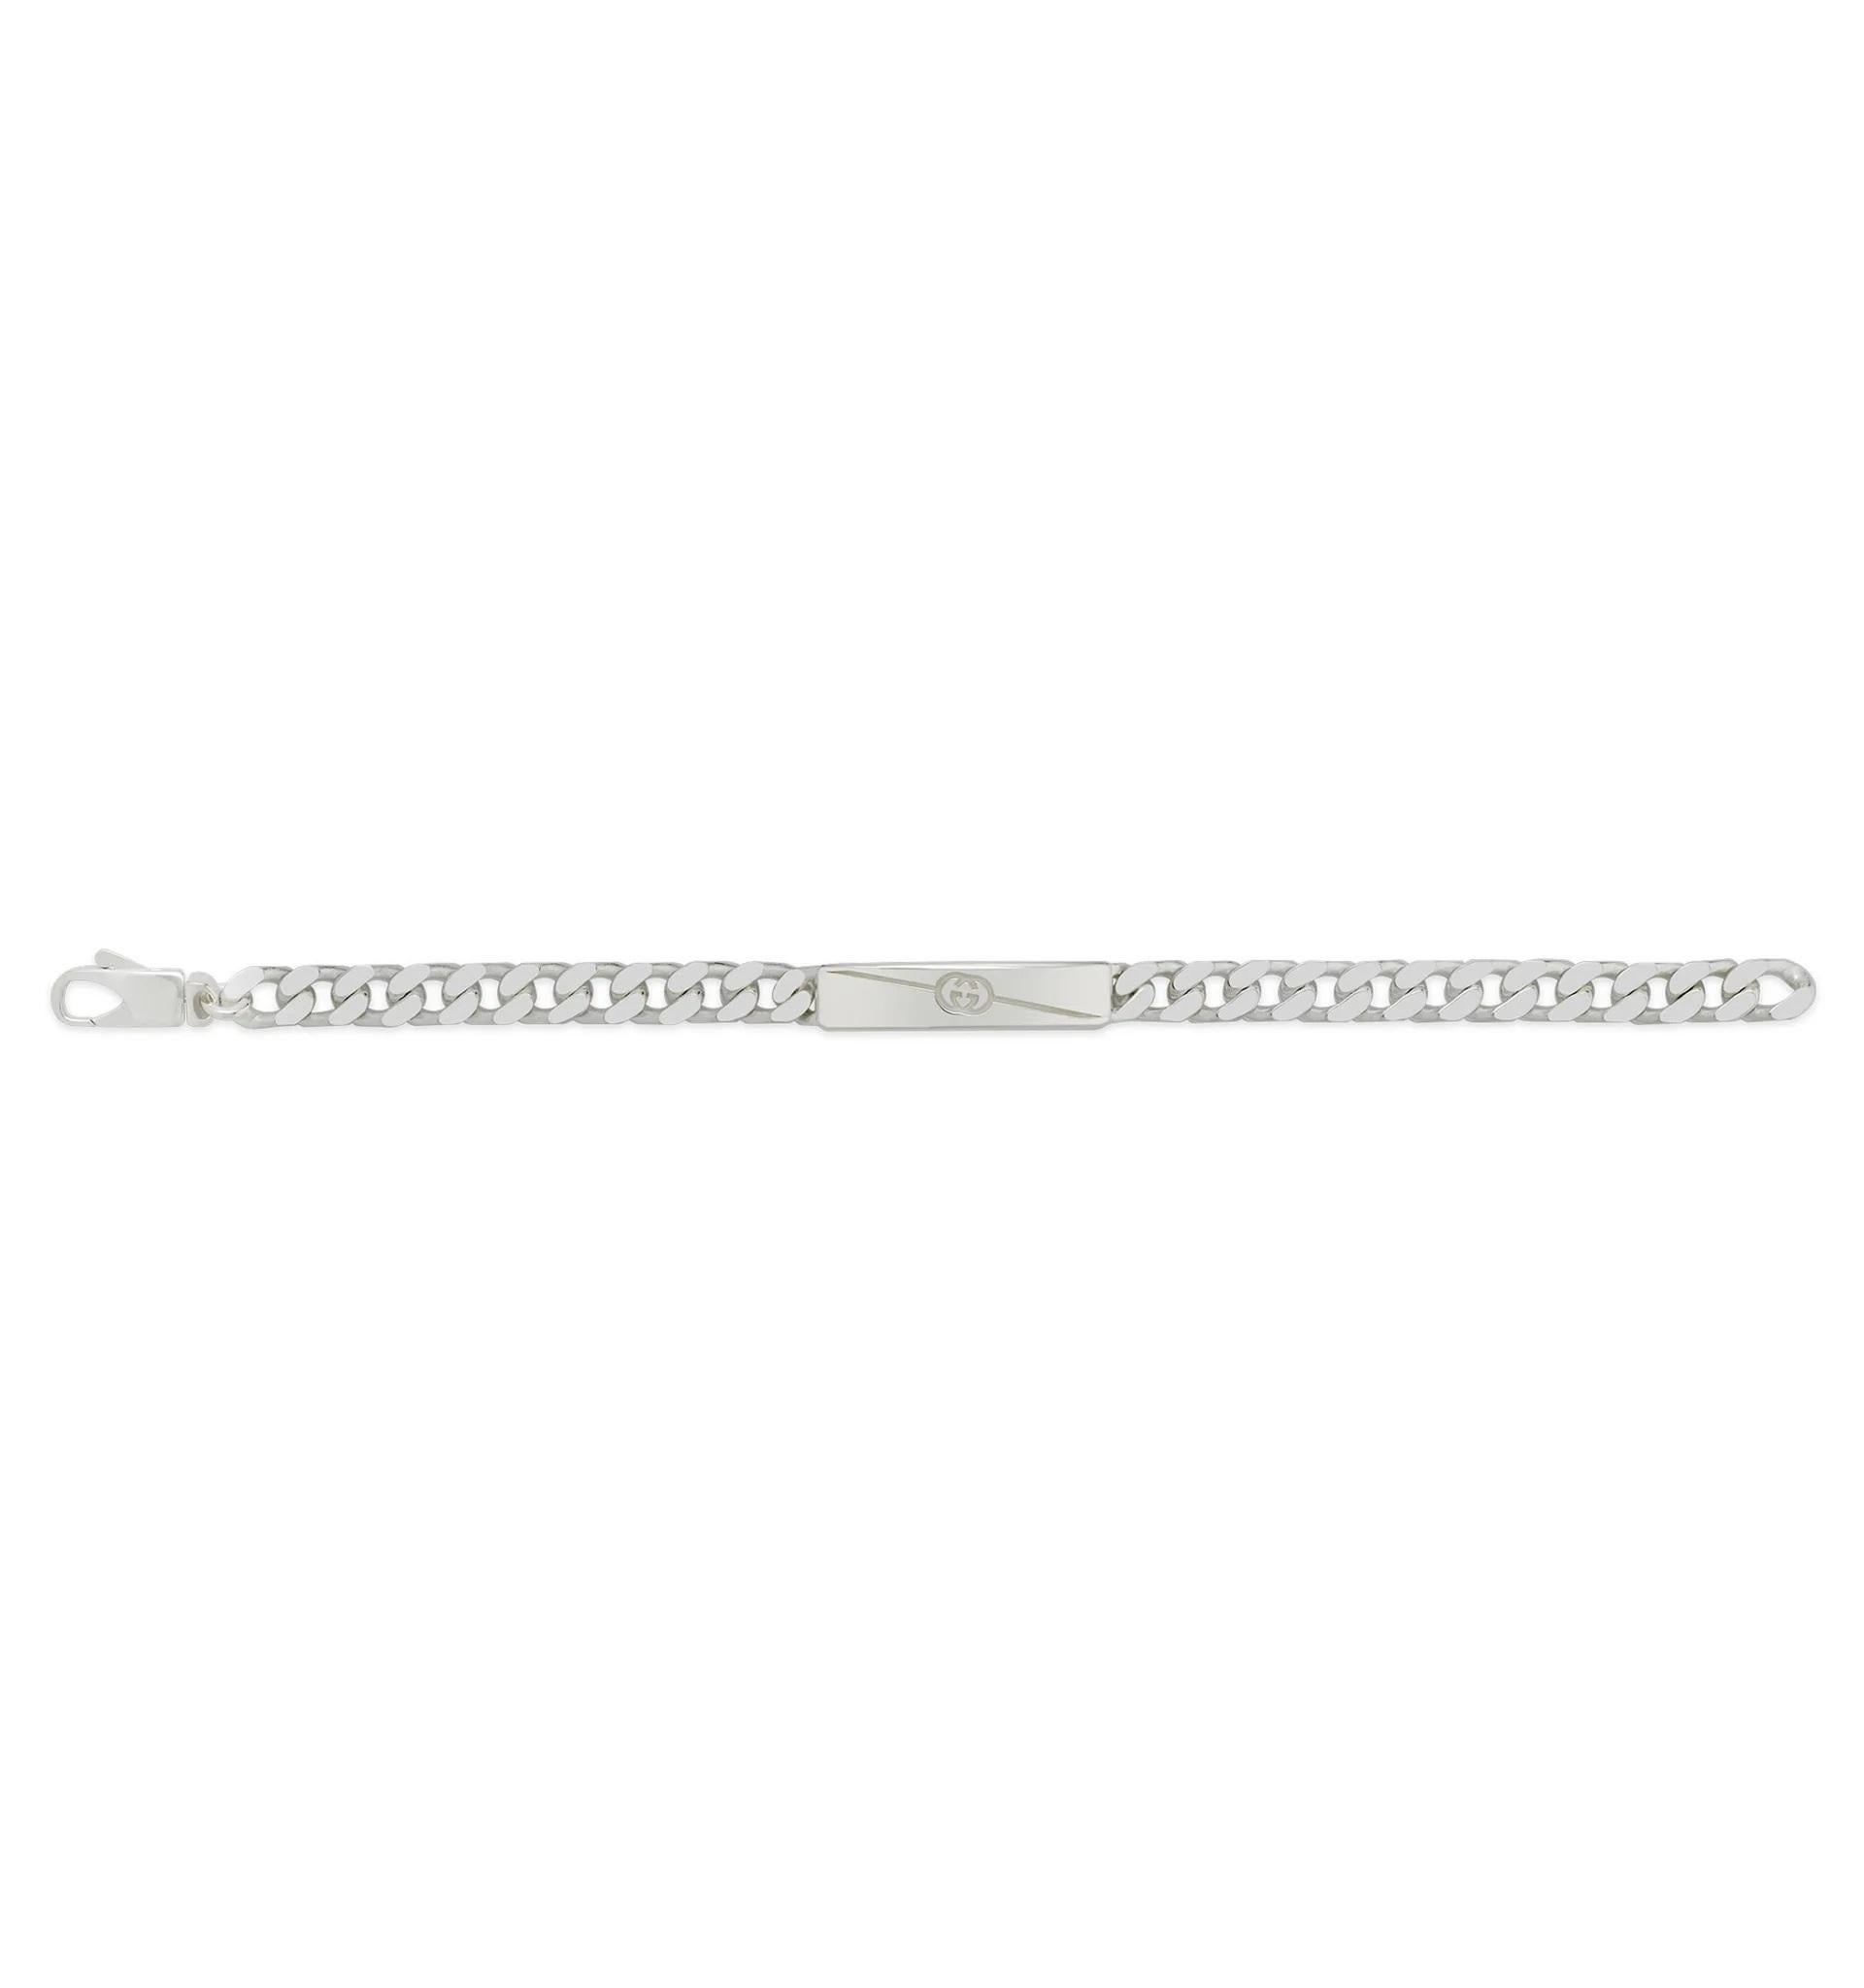 This stylish Gucci Tag bracelet has been expertly crafted from the finest sterling silver, and features the iconic GG motif. The perfect accessory for any Gucci lover to add to their jewellery collection.

Bracelet Style: Chain
Jewellery Gender: